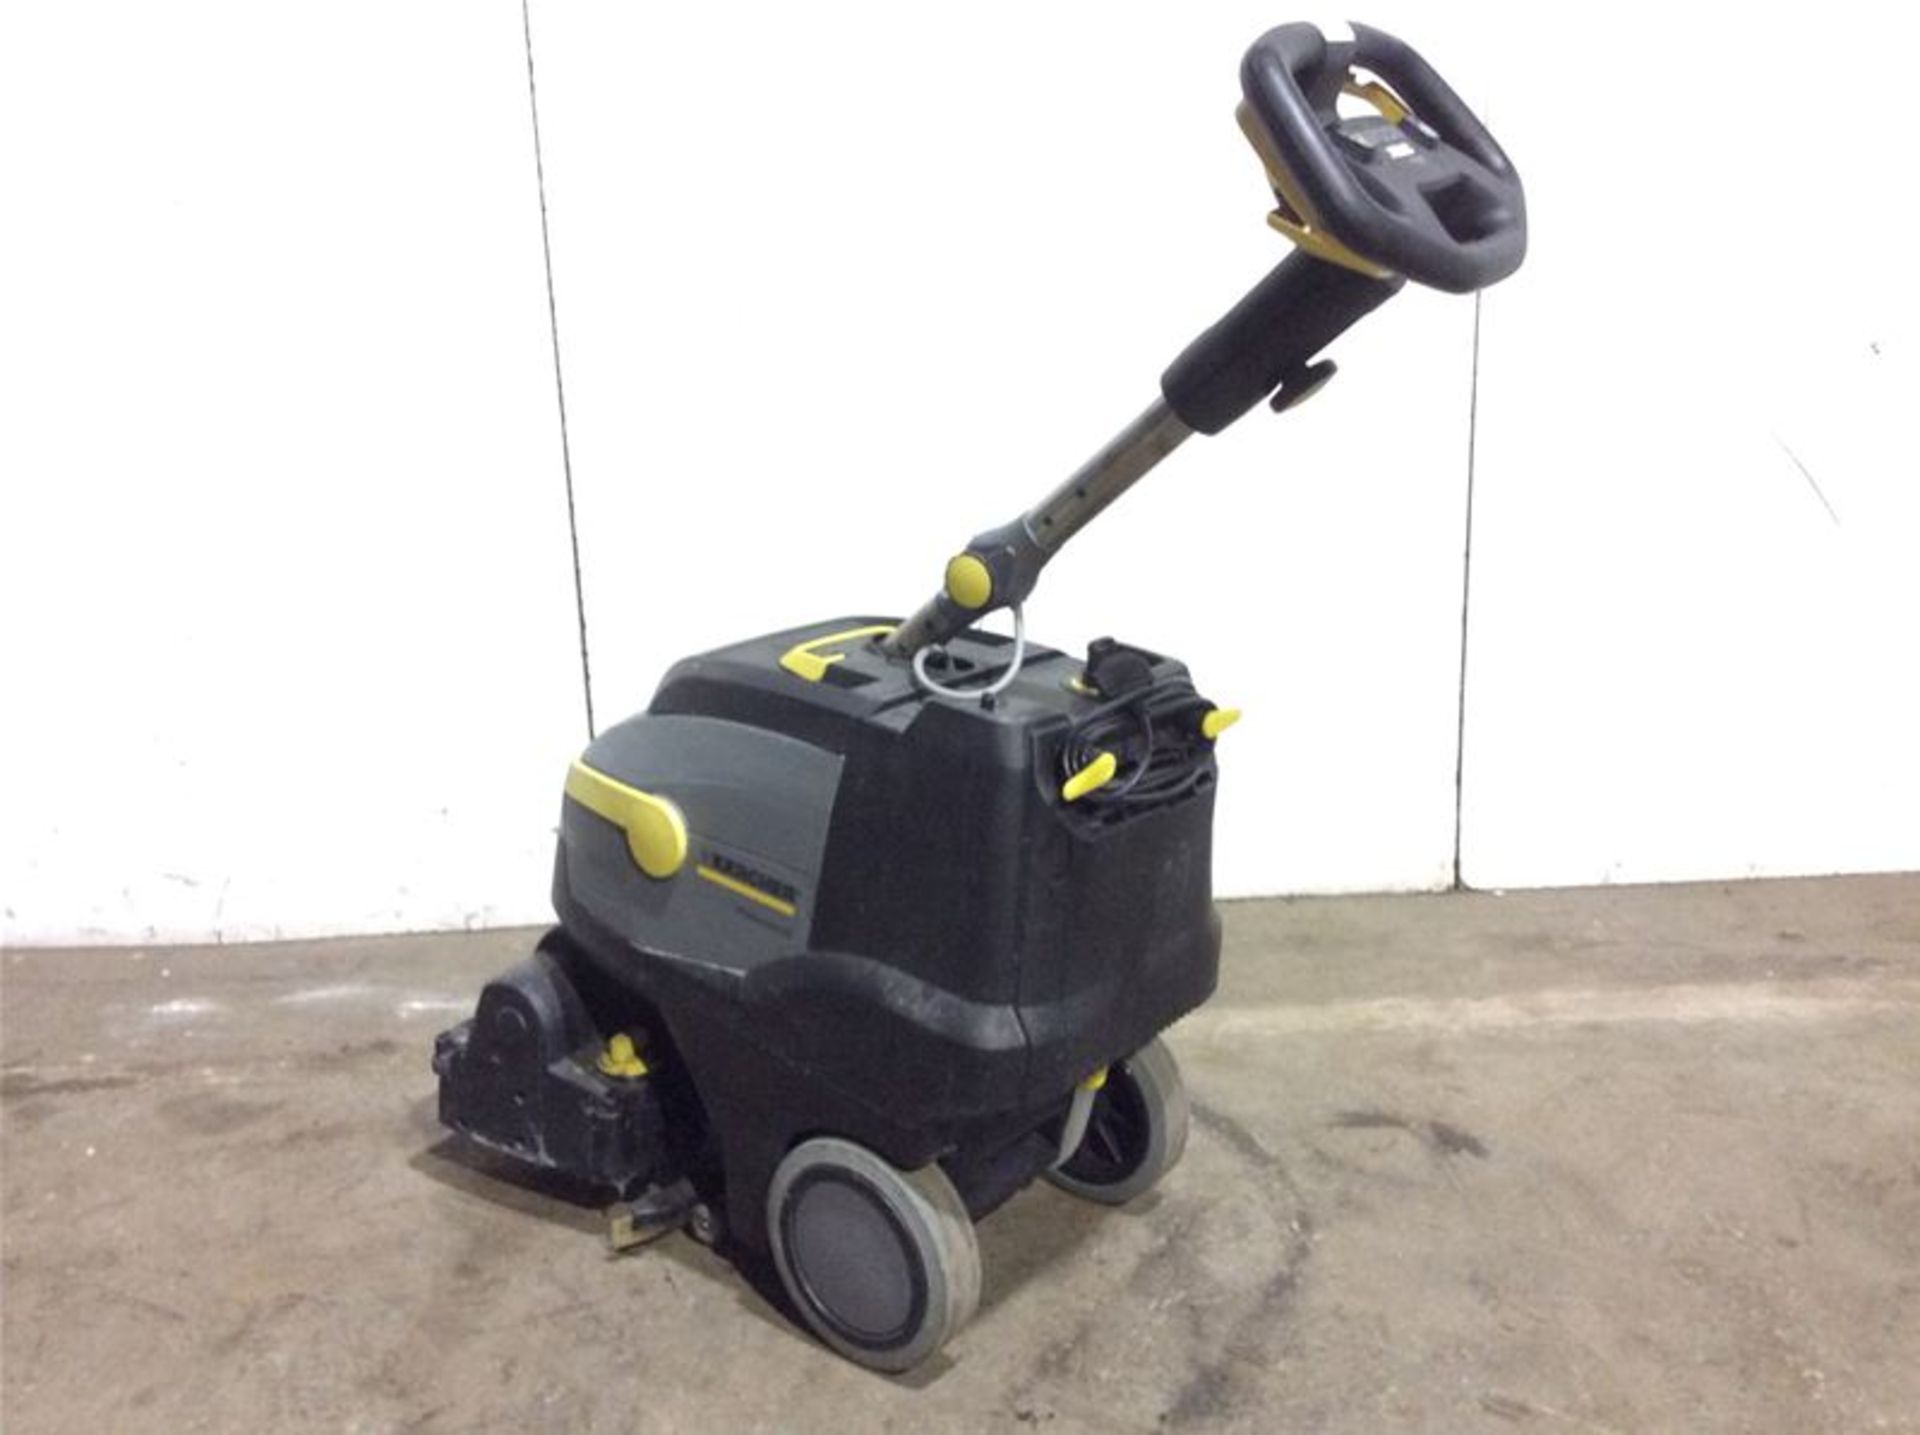 KARCHER BR 35/12 C WALK-BEHIND COMPACT FLOOR SCRUBBER - BATTERY OPERATED - Image 2 of 5